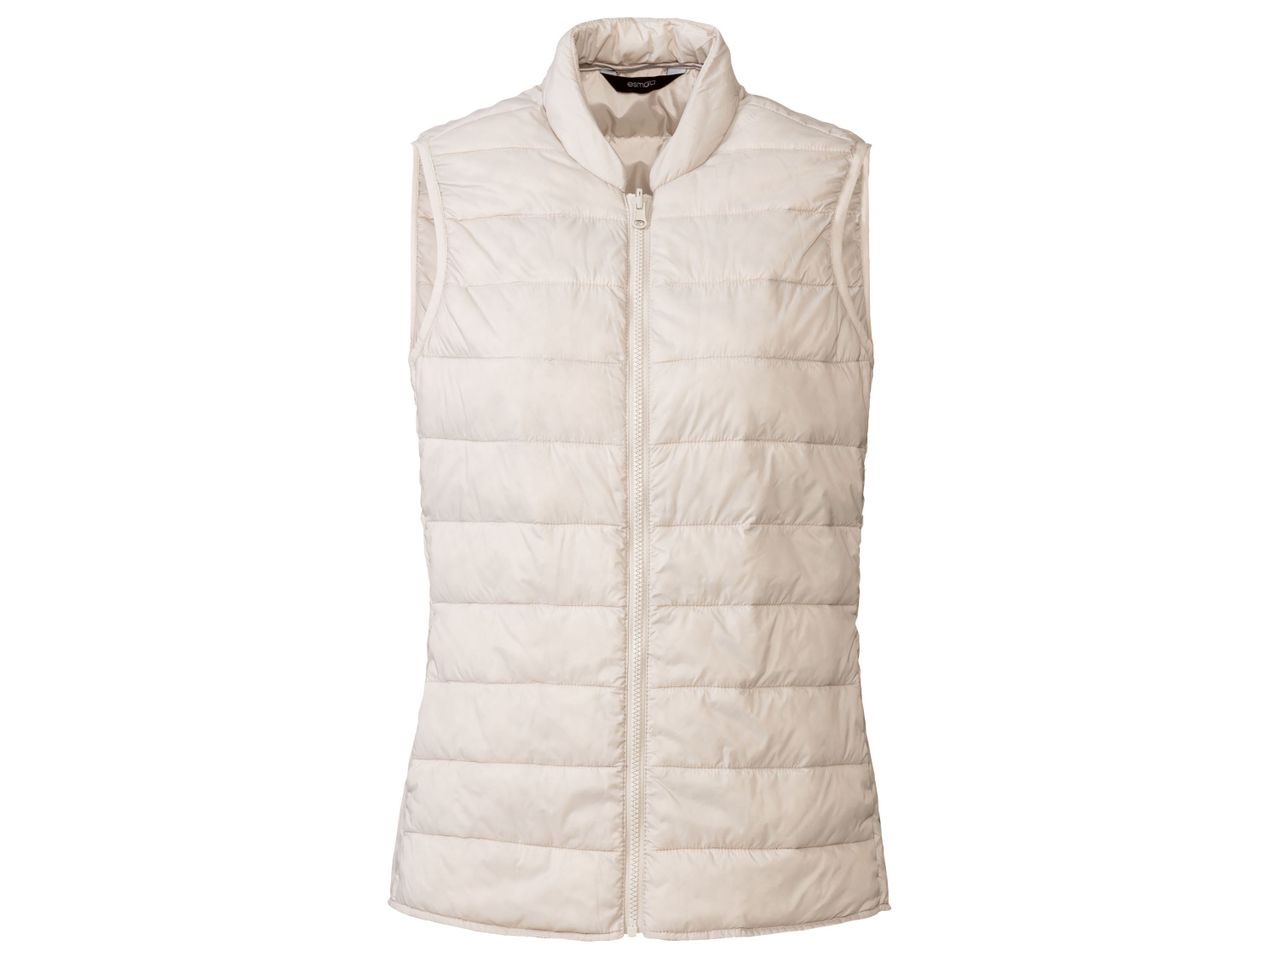 Go to full screen view: Ladies’ Parka with Inner Vest - Image 4